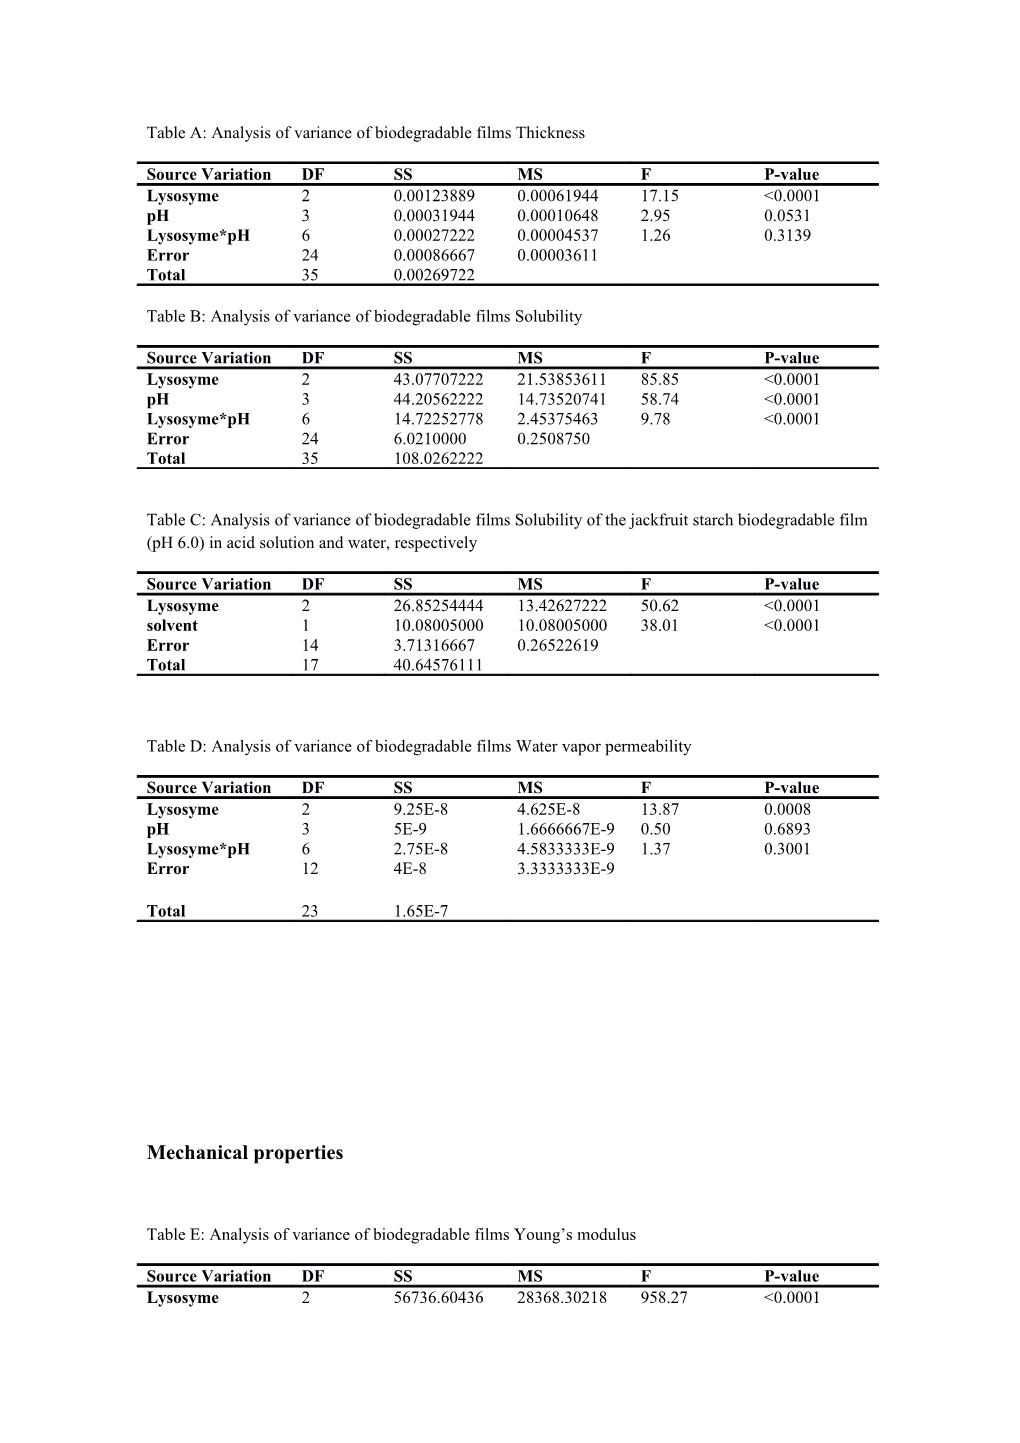 Table A: Analysis of Variance of Biodegradable Films Thickness